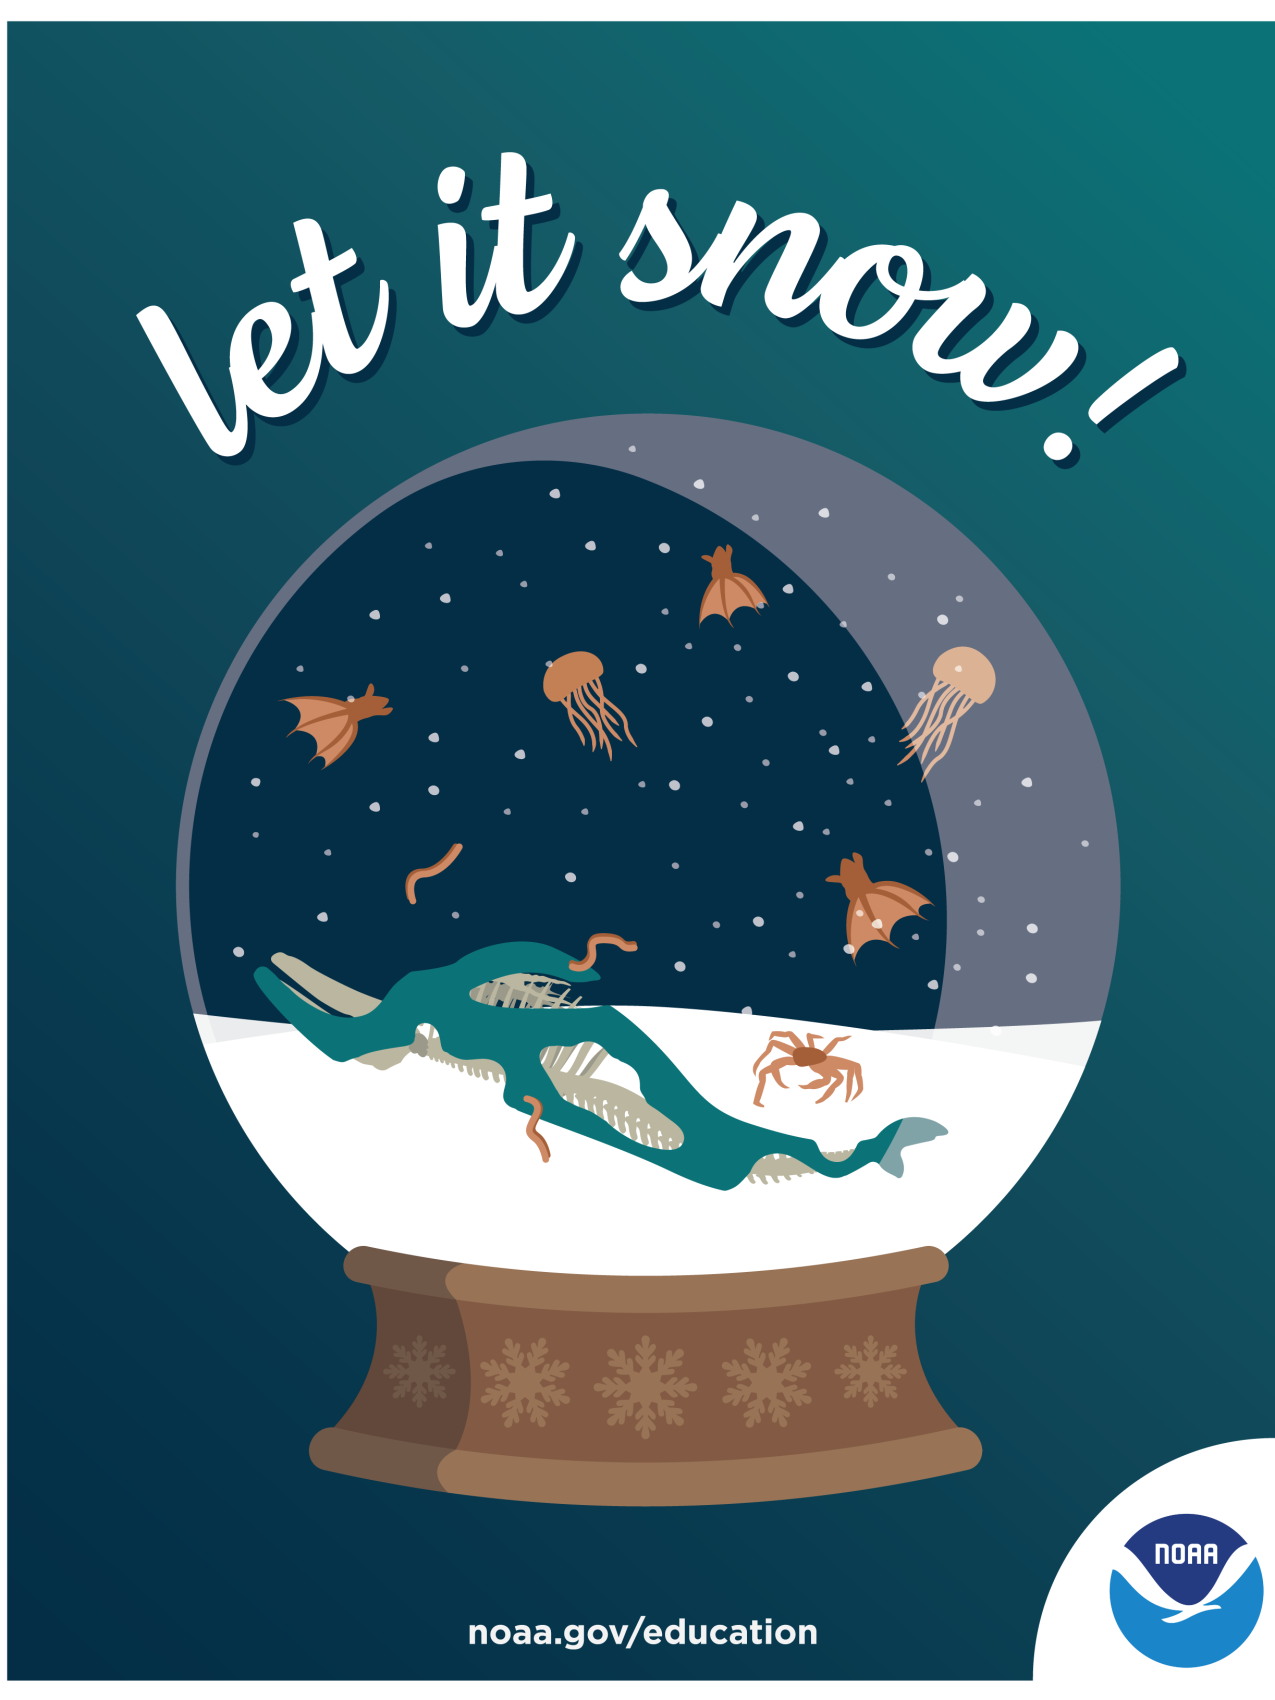 An illustrated holiday card featuring a snow globe containing a whale fall, marine snow, and several creatures, including vampire squid, hagfish, jellyfish, and a grooved tanner crab. There is a NOAA logo in the corner of the card. Text: Let it snow! noaa.gov/education